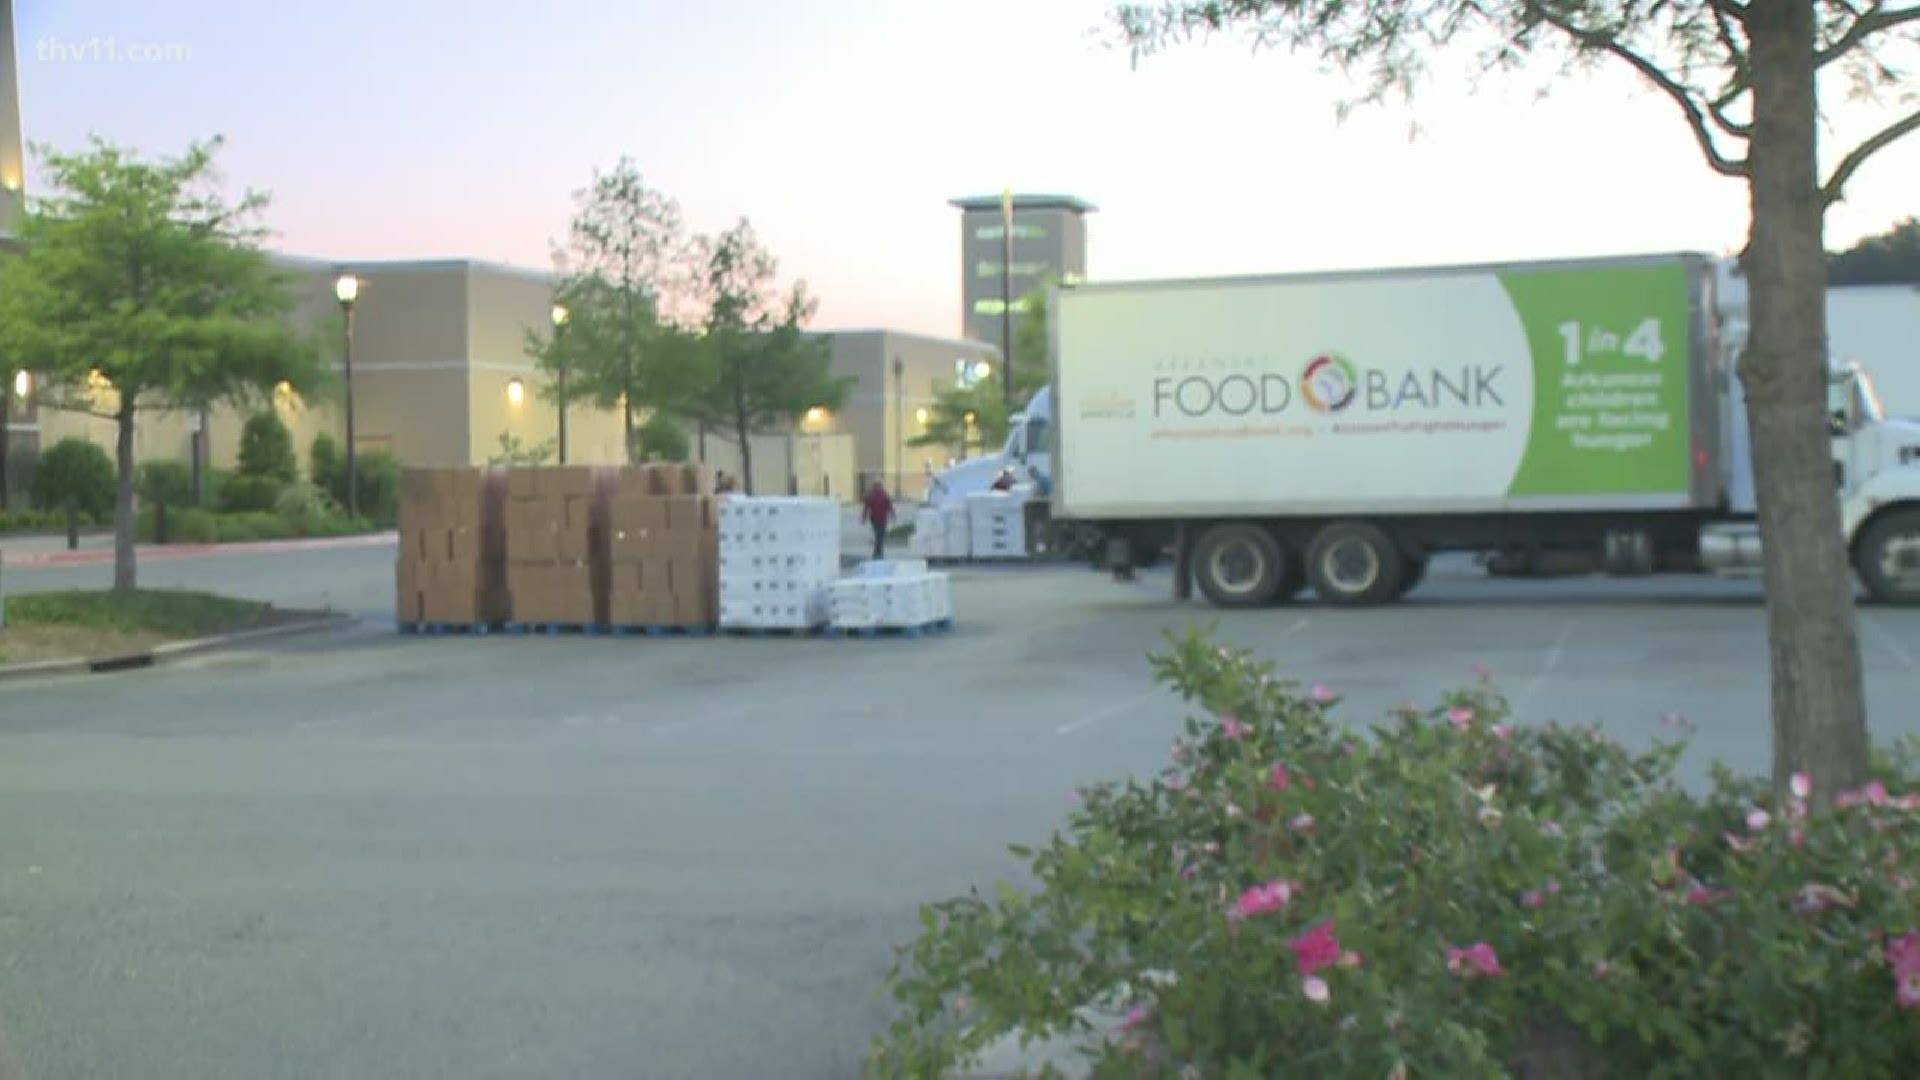 The Arkansas Foodbank will be giving out food to hundreds of families who need it most during the pandemic.